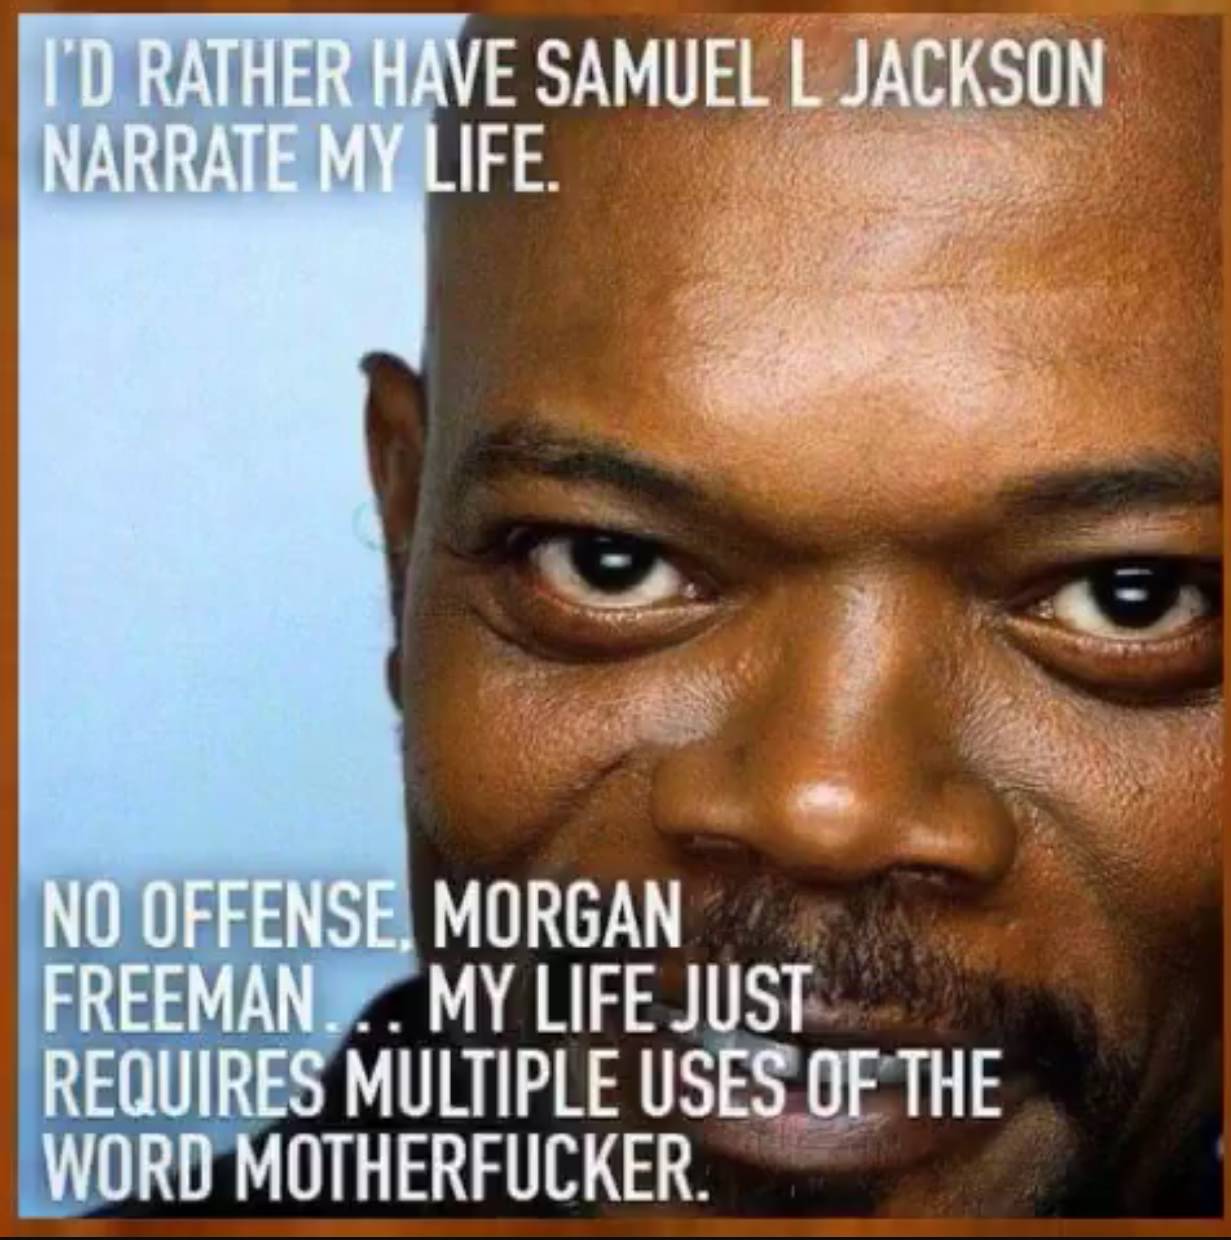 samuel l jackson - I'D Rather Have Samuell Jackson Narrate My Life. No Offense. Morgan Freeman... My Life Just Requires Multiple Uses Of The Word Motherfucker.